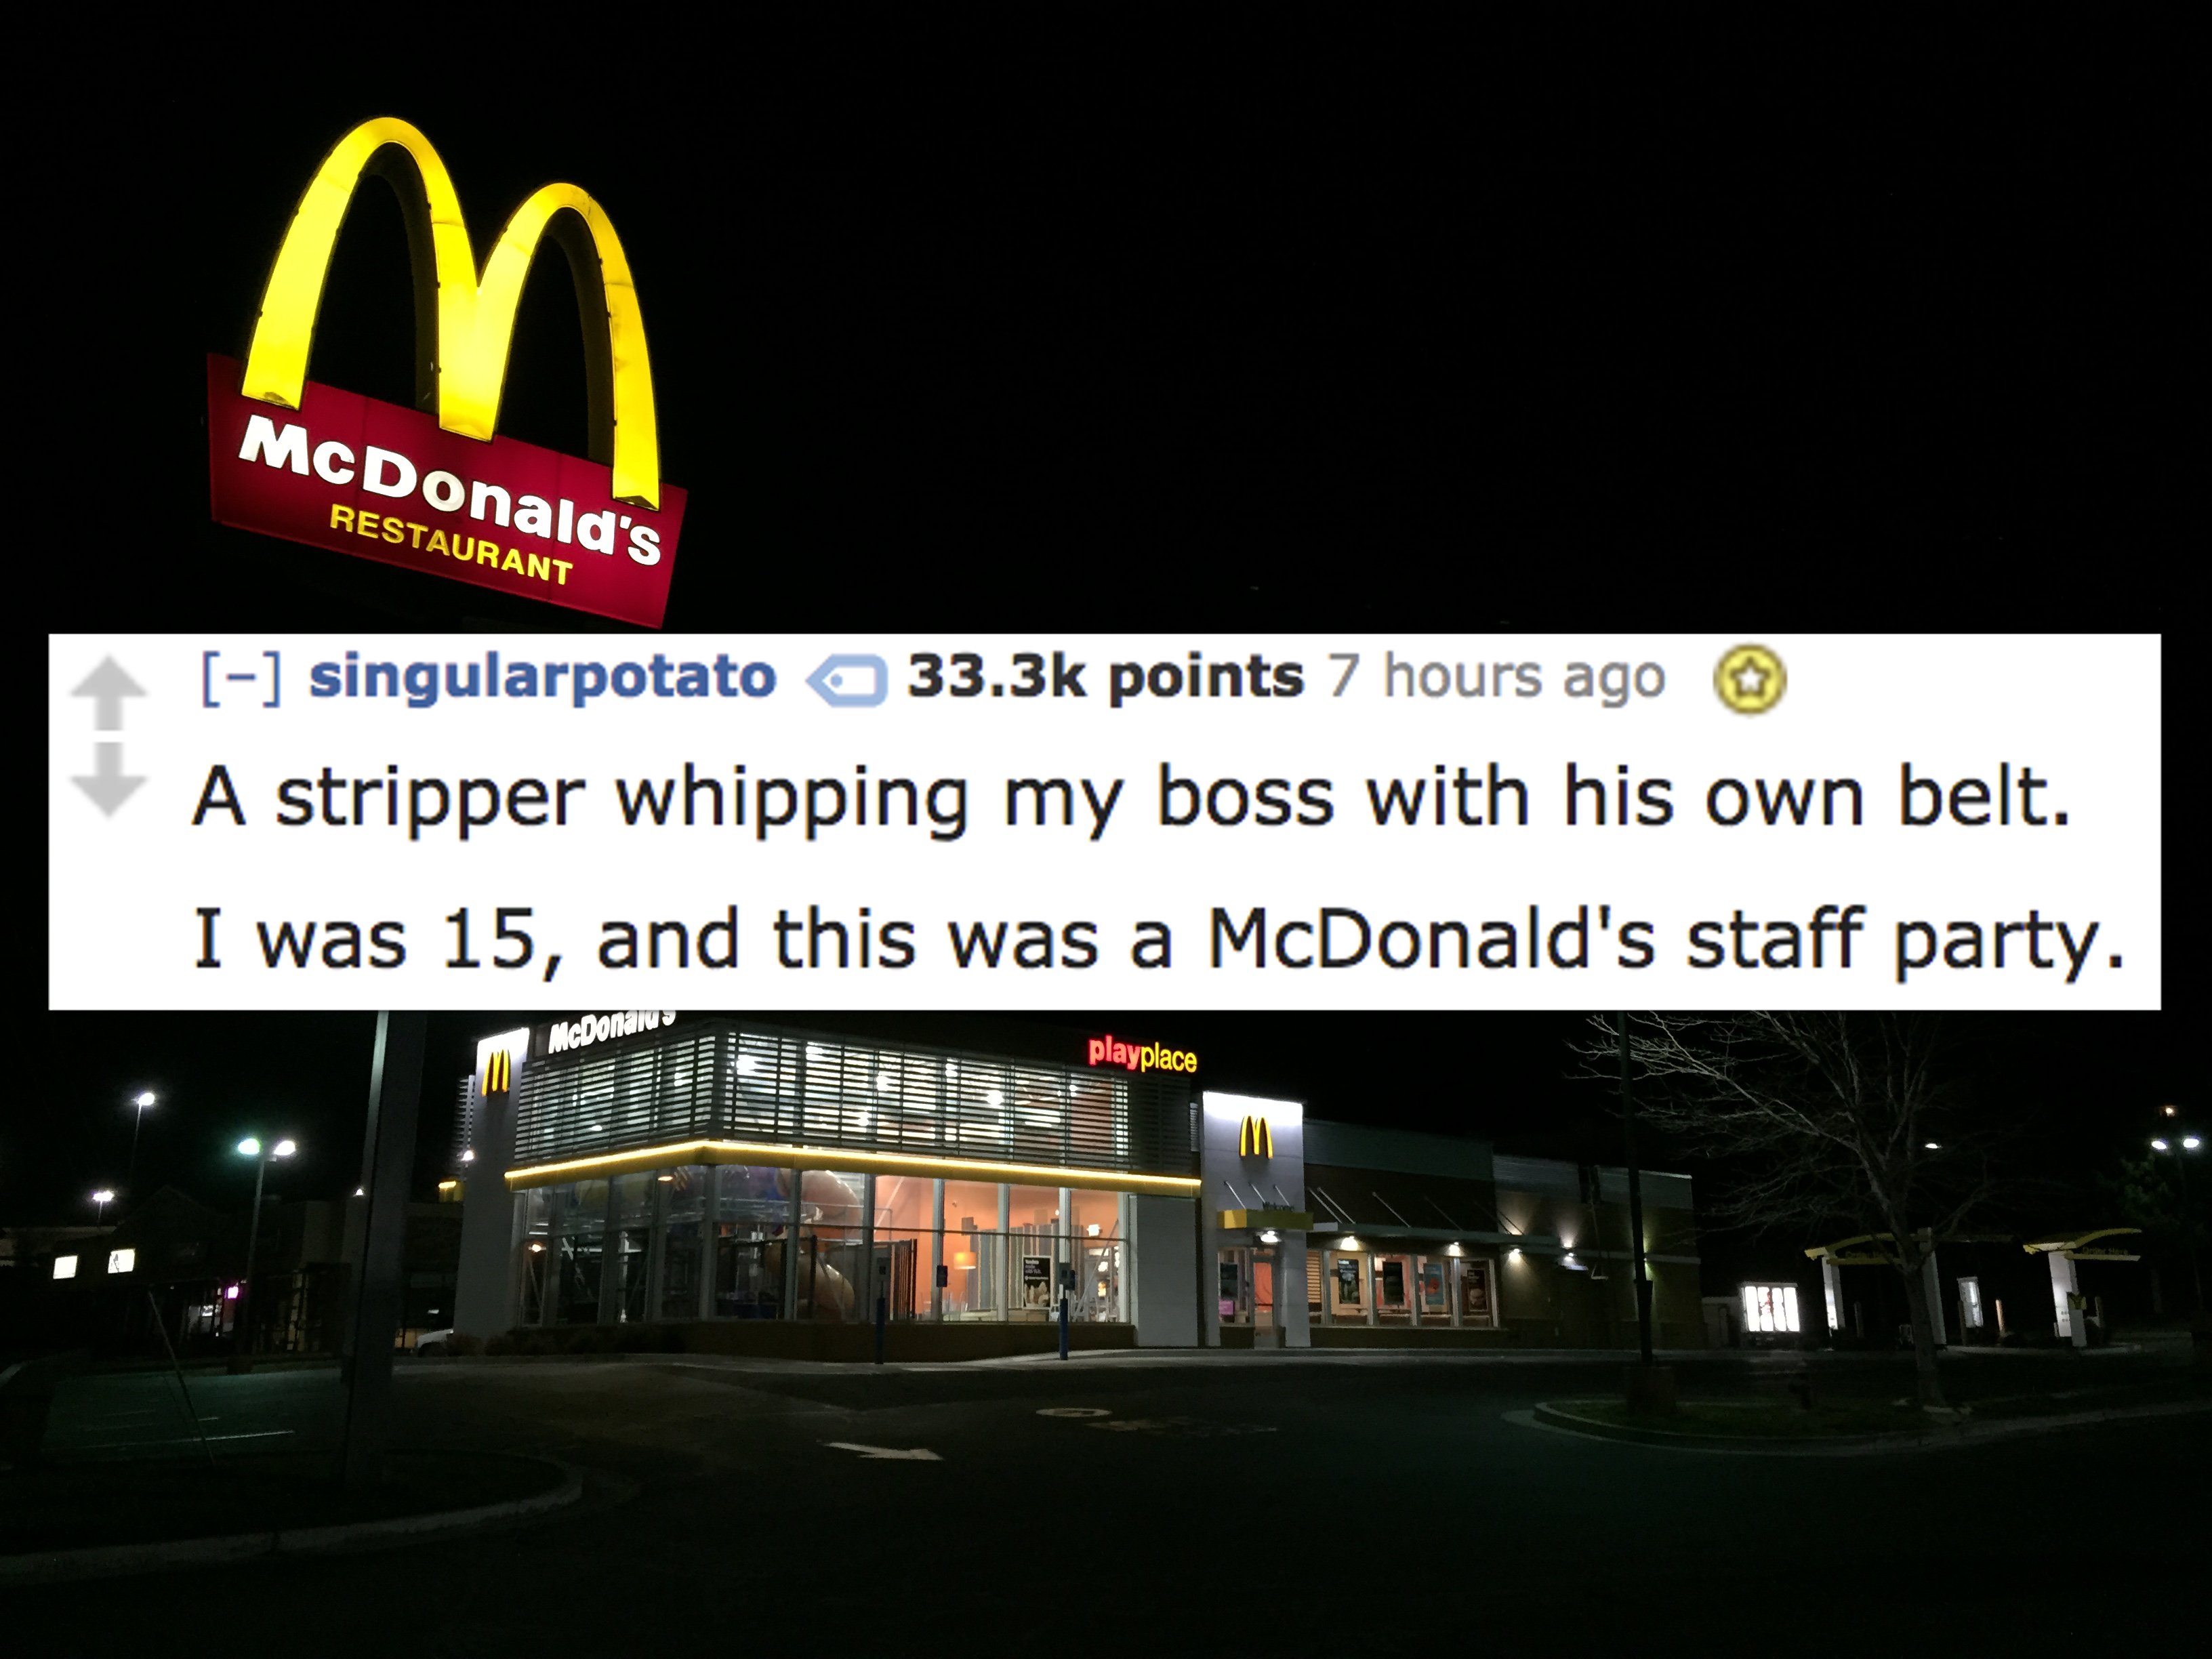 1 00 am - McDonald's Restaurant singularpotato points 7 hours ago A stripper whipping my boss with his own belt. I was 15, and this was a McDonald's staff party. playplace